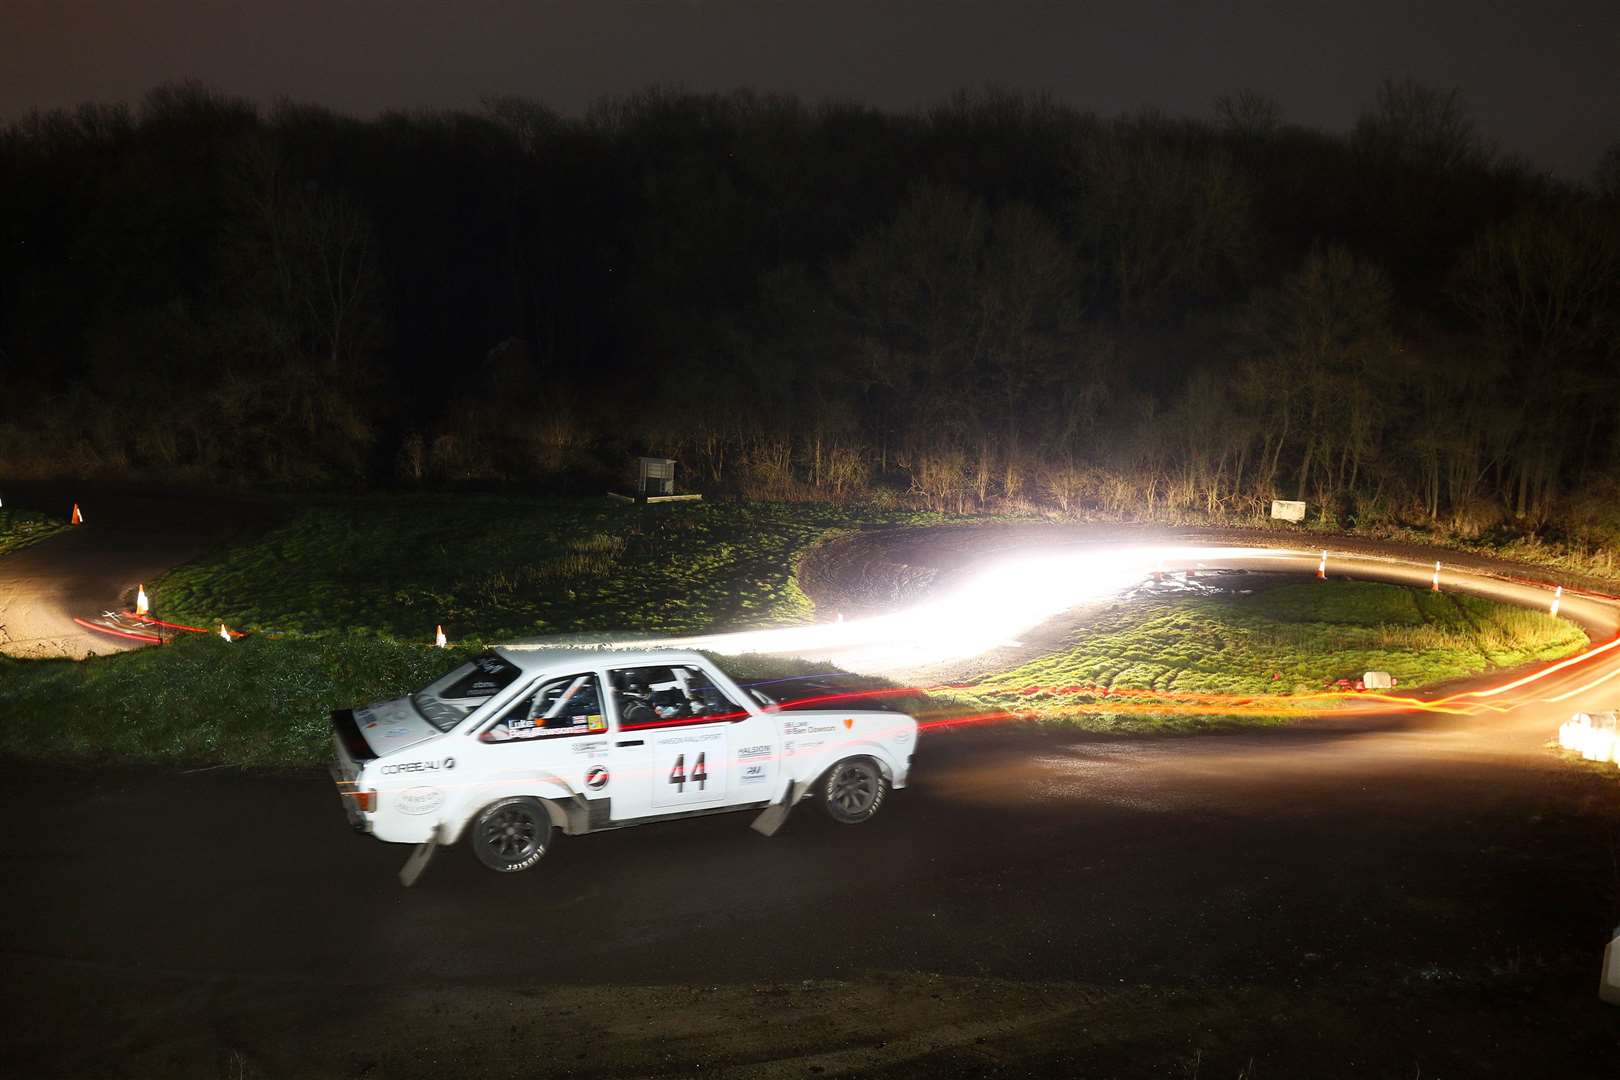 Ben and Luke at the Brands Hatch Stages Rally. Picture: M&H Photography